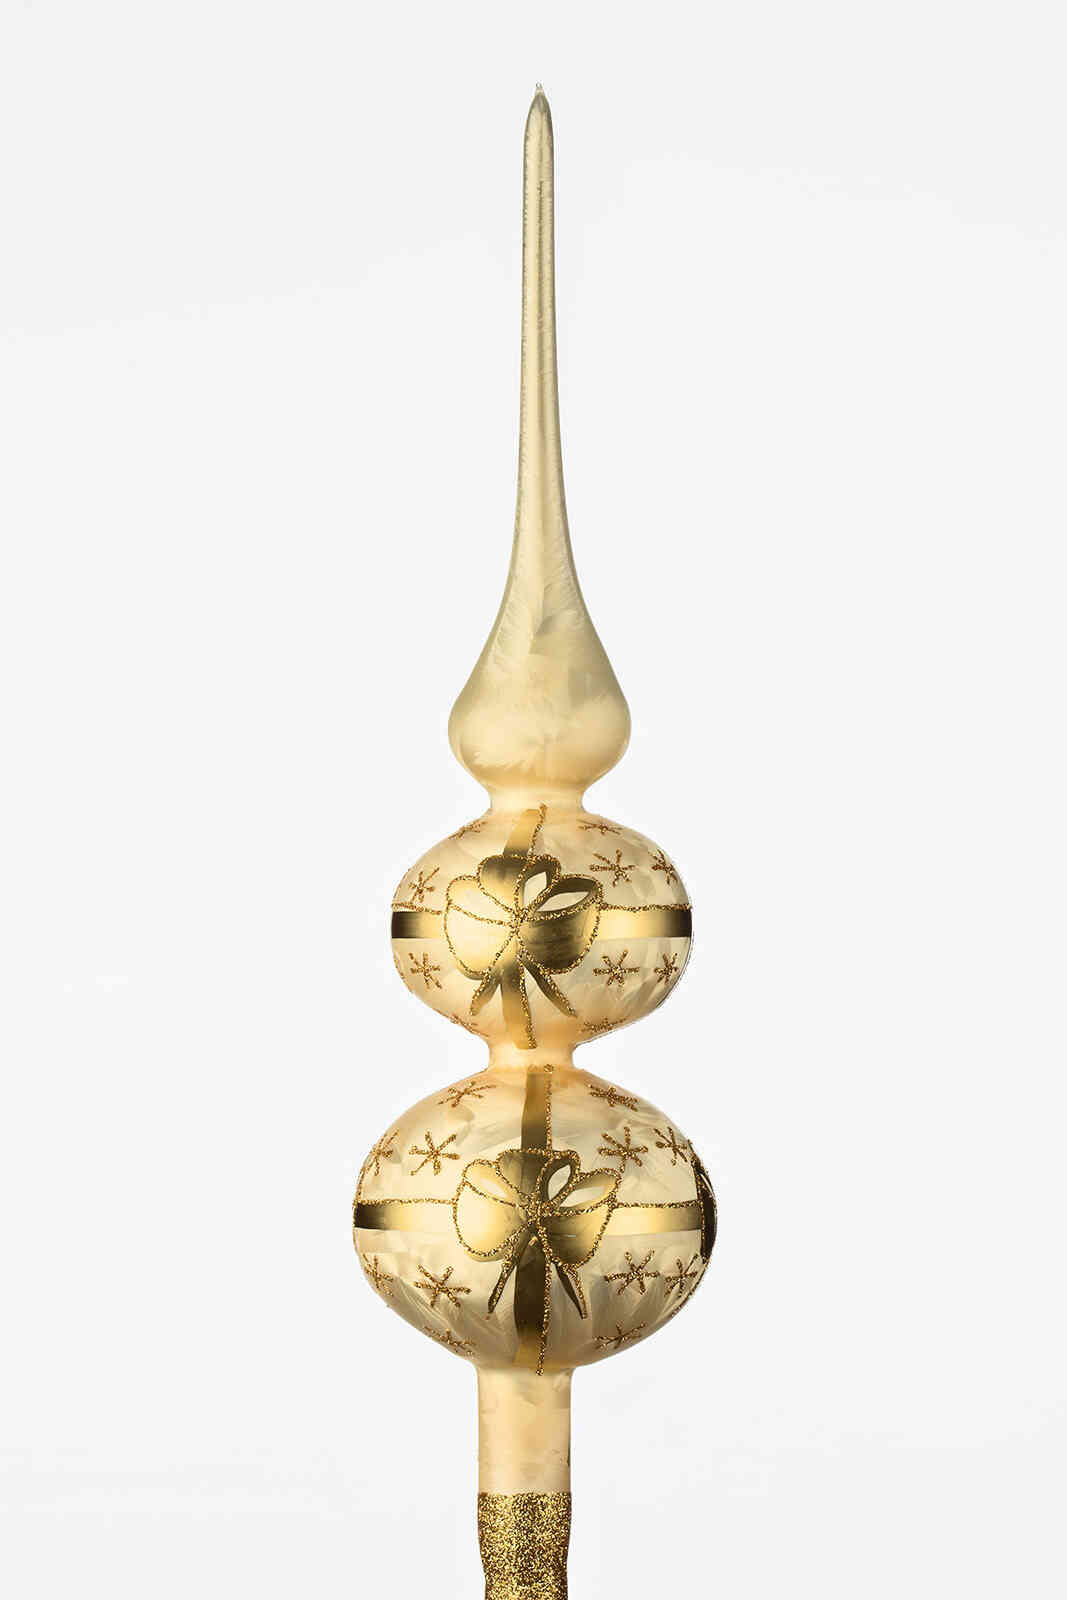 One handmade christmas tree topper in "golden with bows".